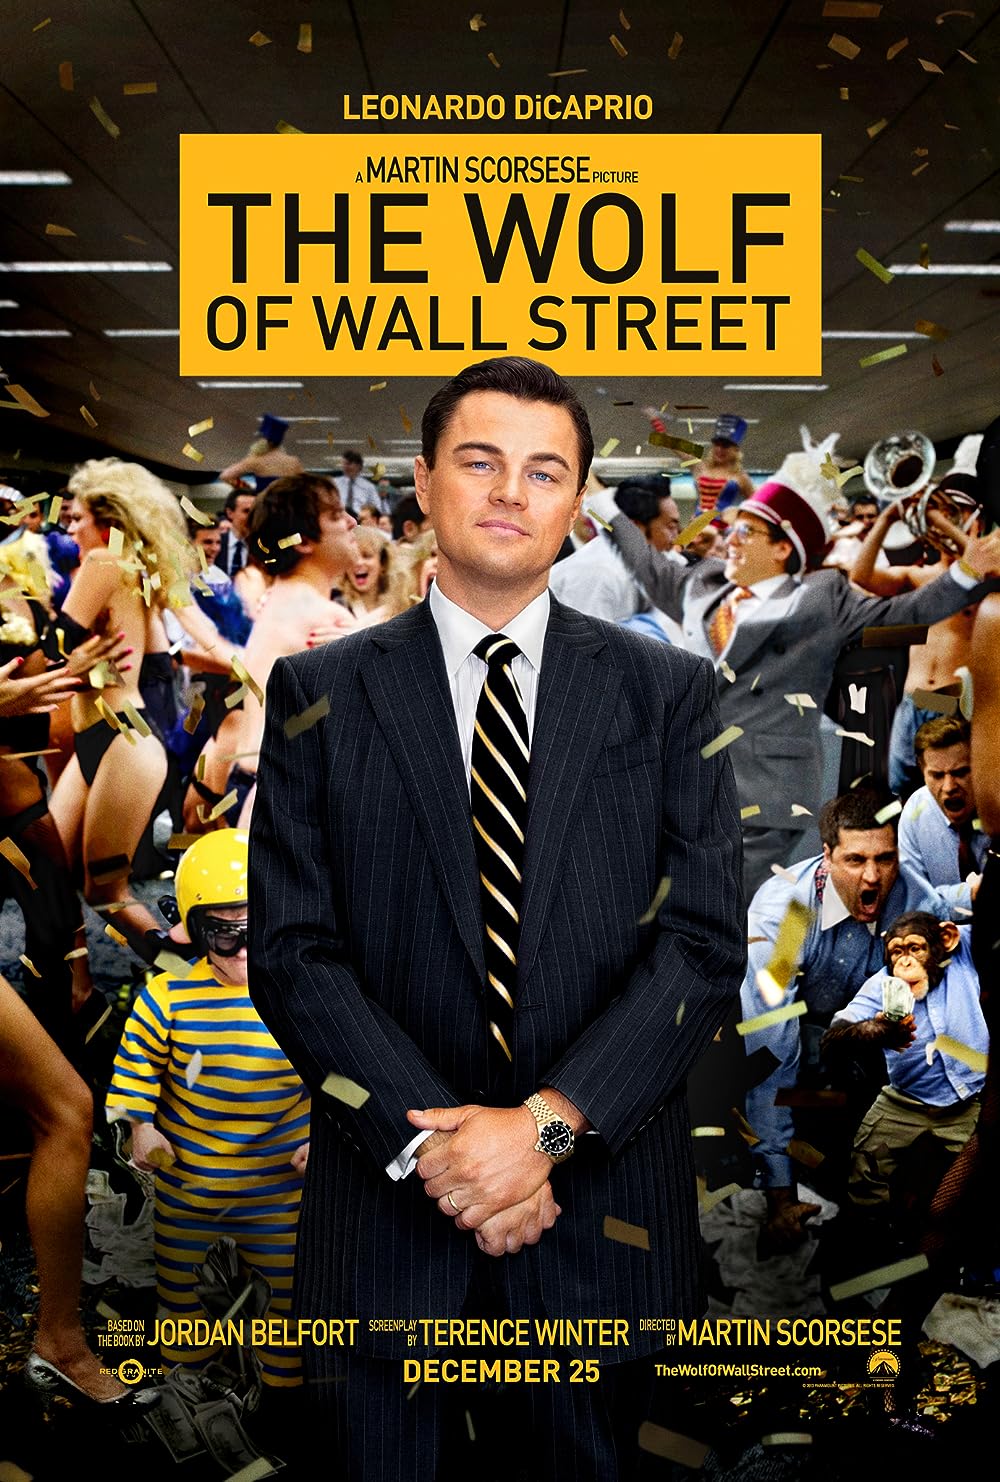 THE WOLF OF WALL STREET 10th Anniversary